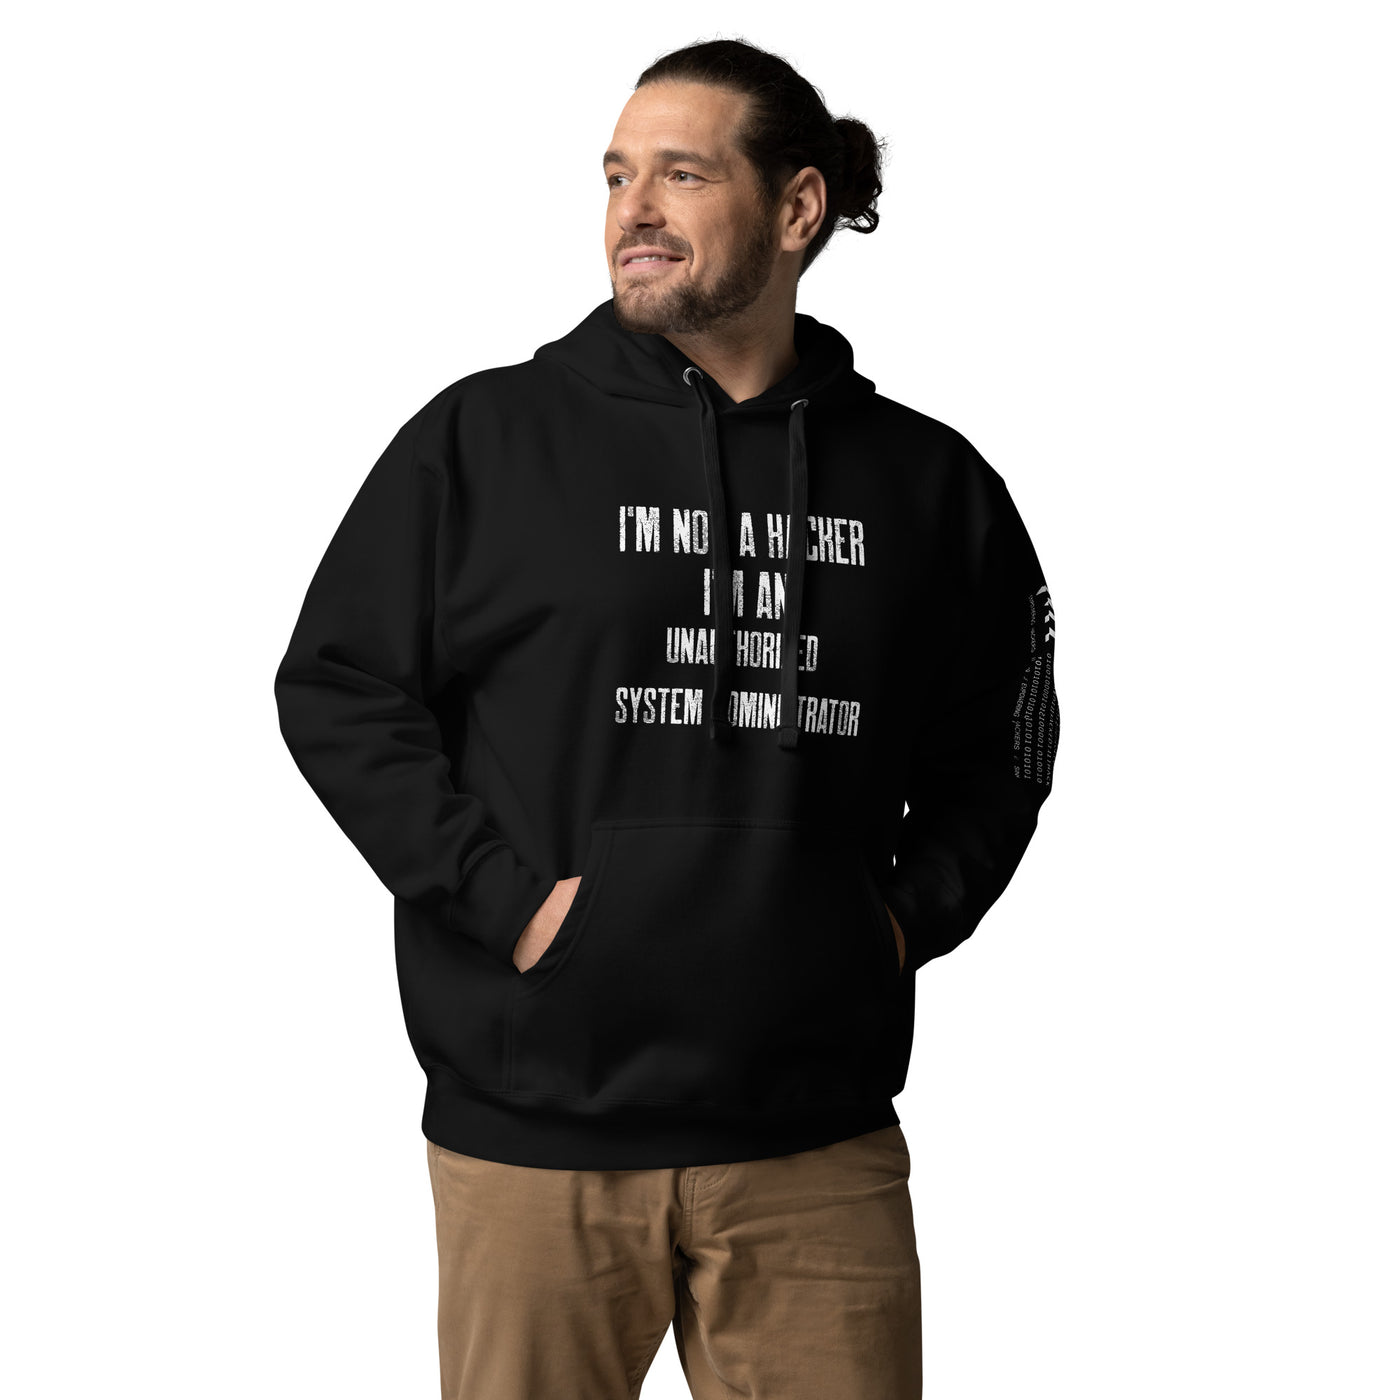 I am not a Hacker, I am an Authorized System Administrator - Unisex Hoodie